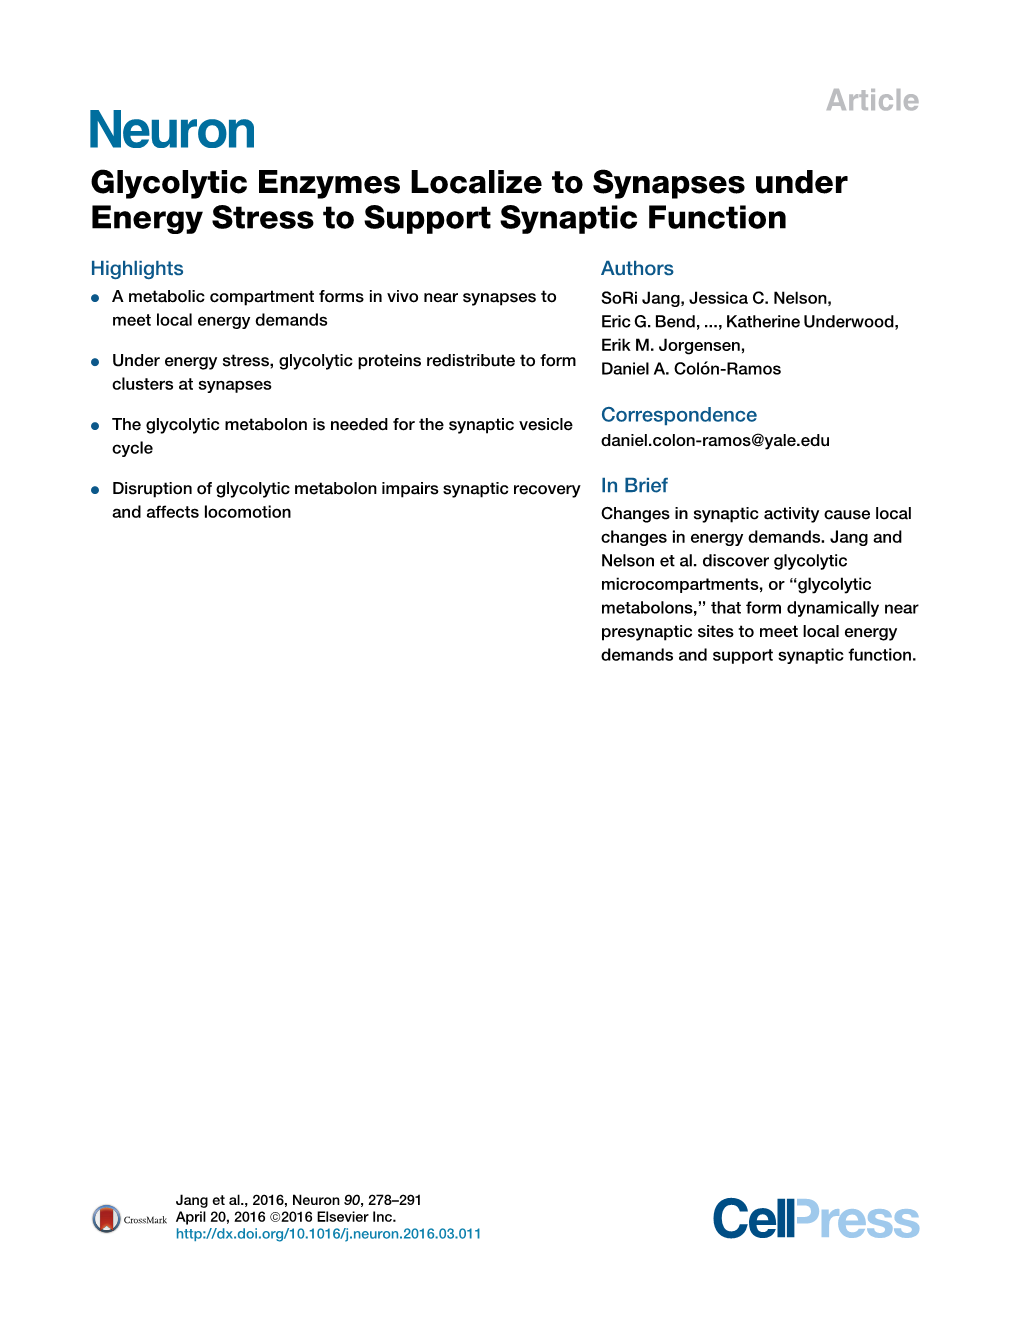 Glycolytic Enzymes Localize to Synapses Under Energy Stress to Support Synaptic Function